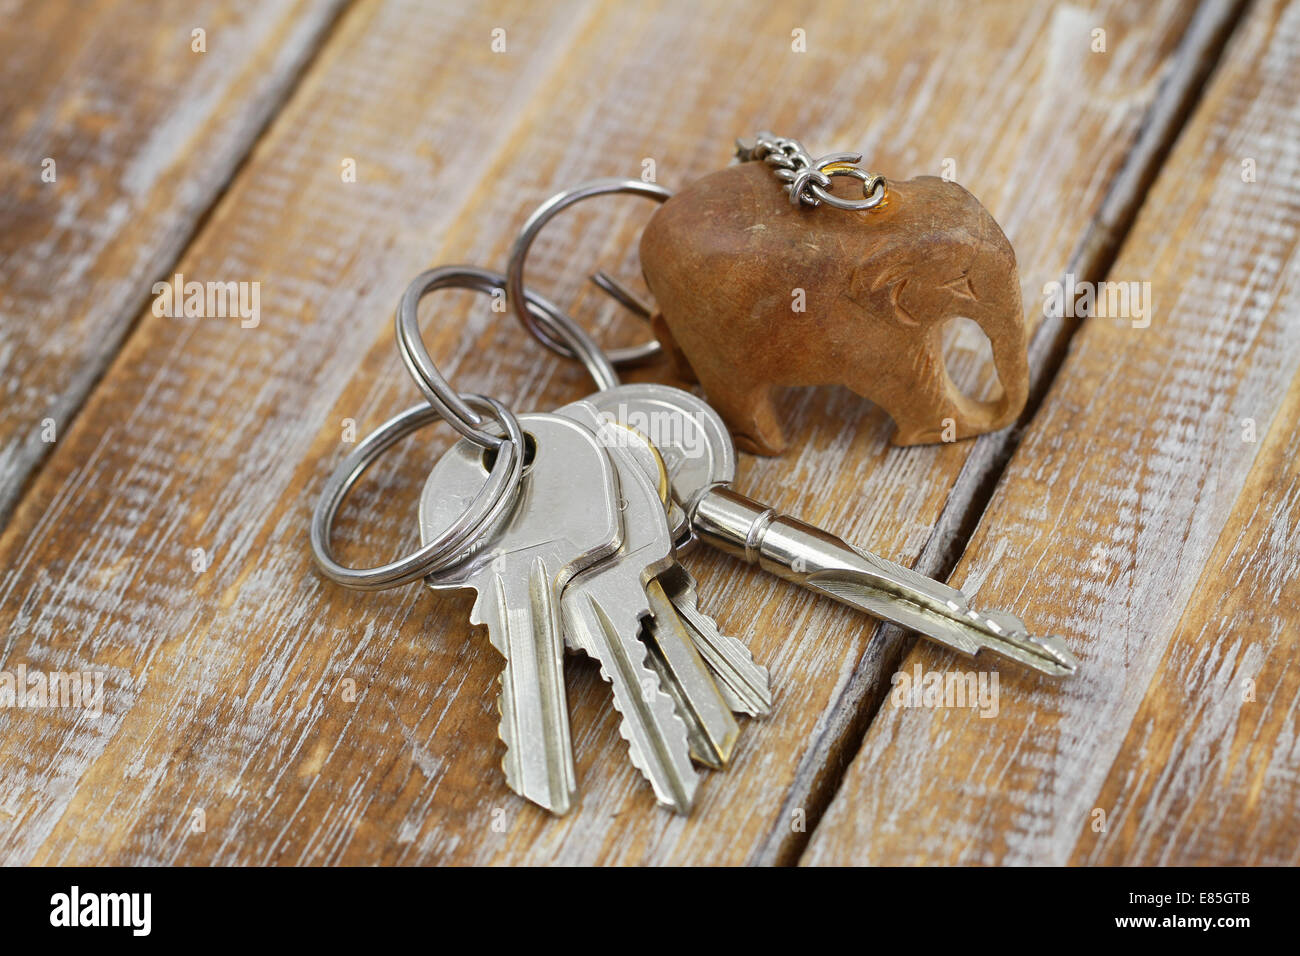 Bunch of keys on chain with little wooden elephant Stock Photo